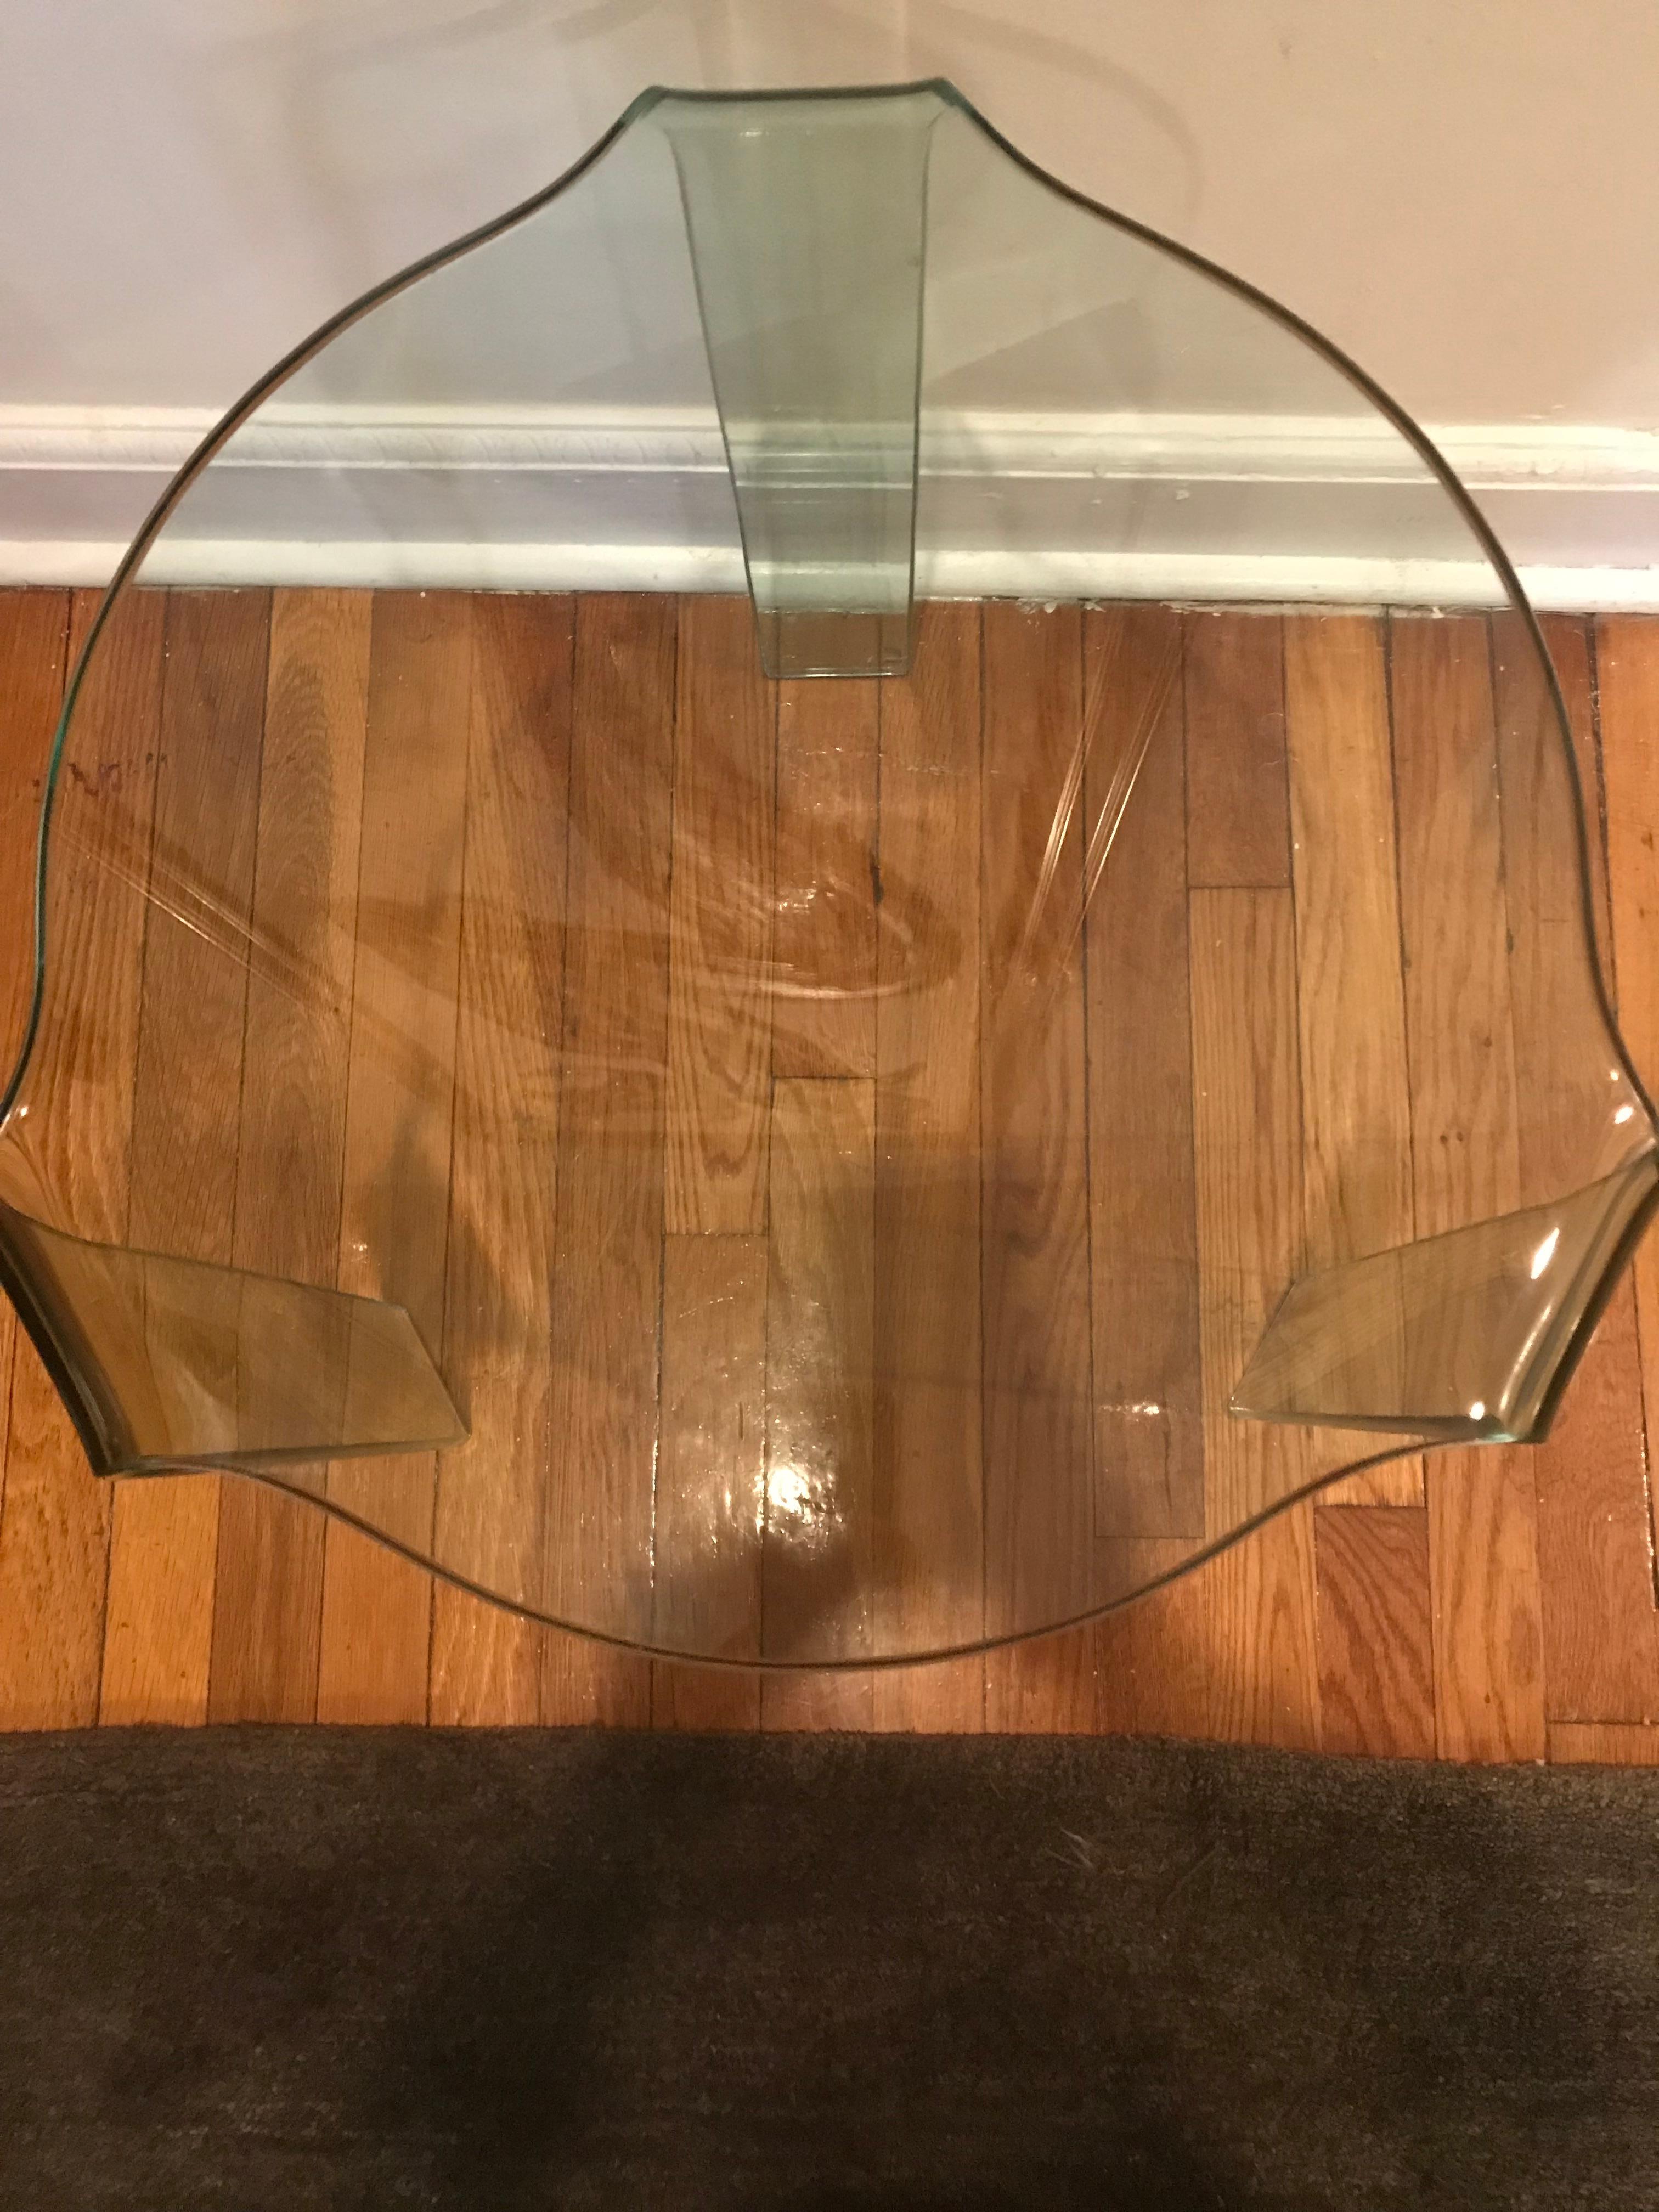 Italian Curved Glass Side Table, Homage to Alvar Alto, Manufactured in Italy by Fiam